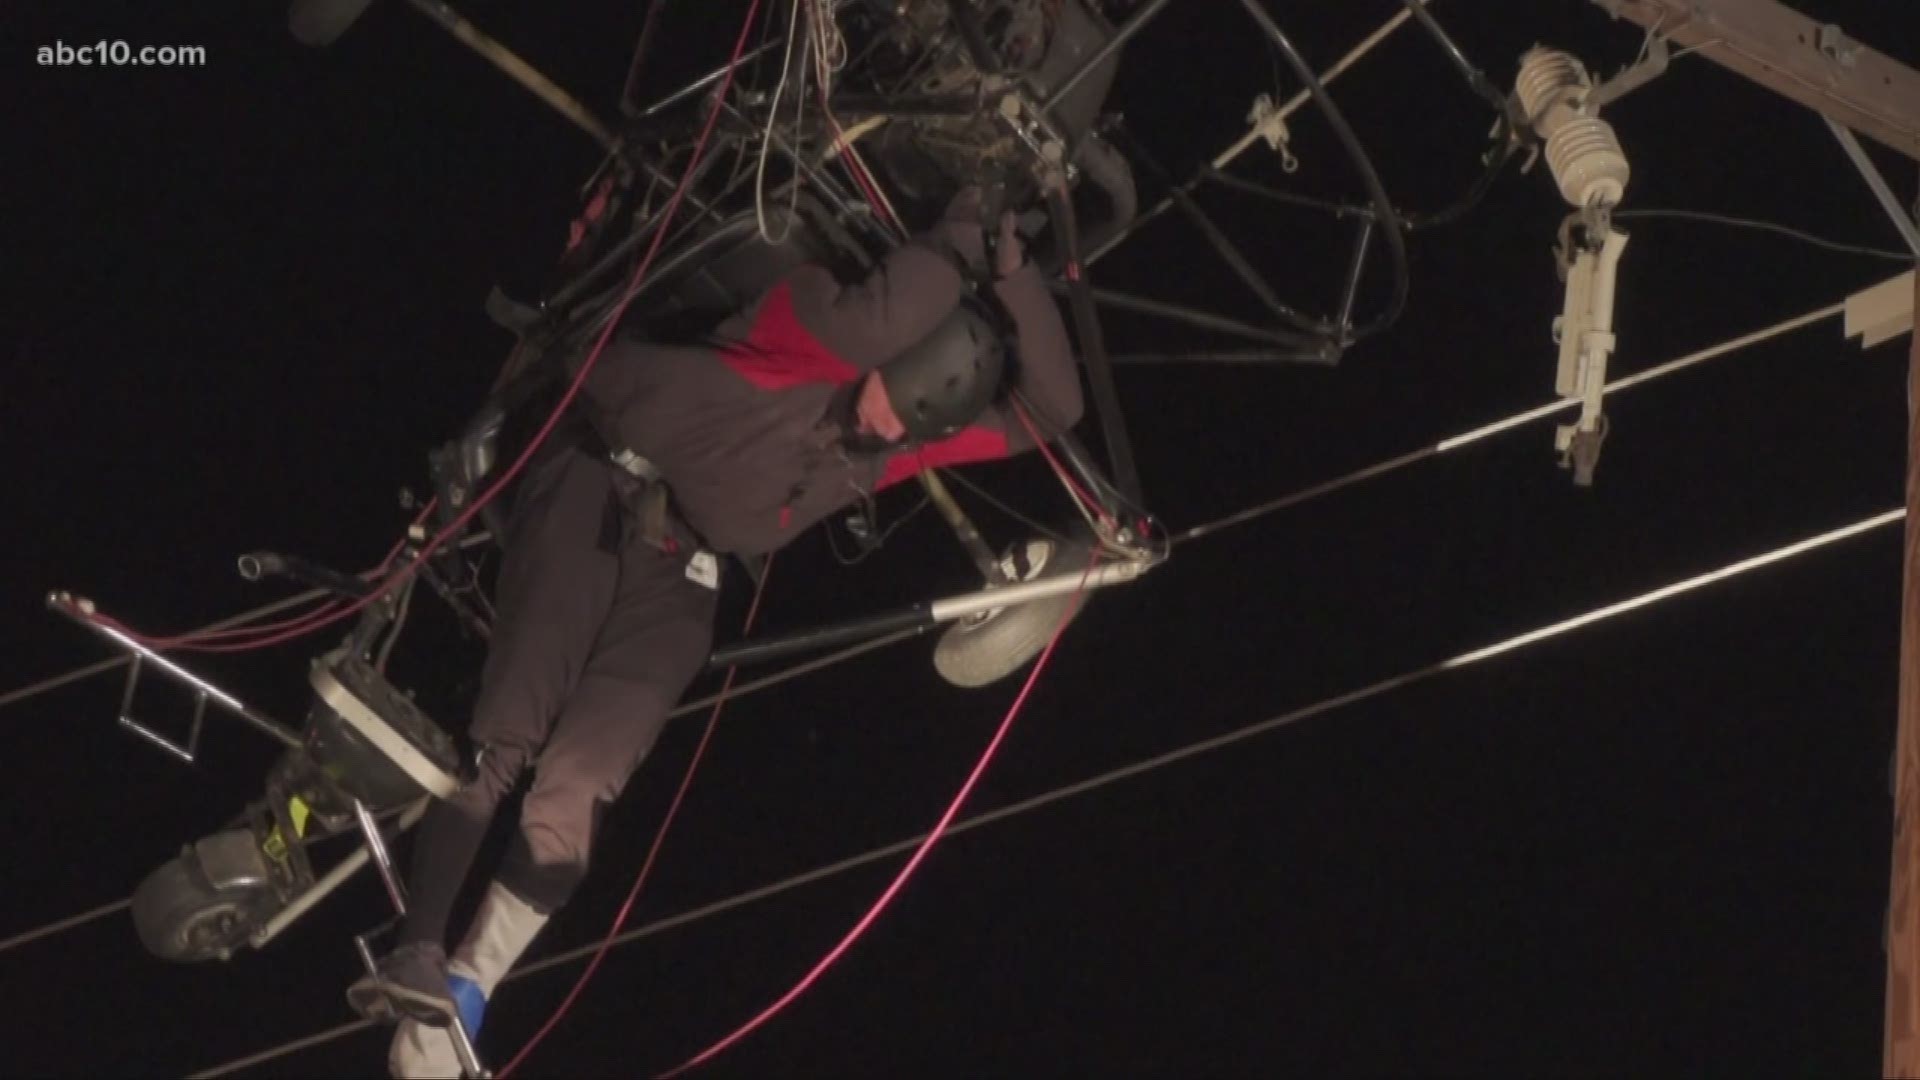 Sheriff officials said the paraglider landed in powerlines in Olivehurst, forcing power outages in the area.